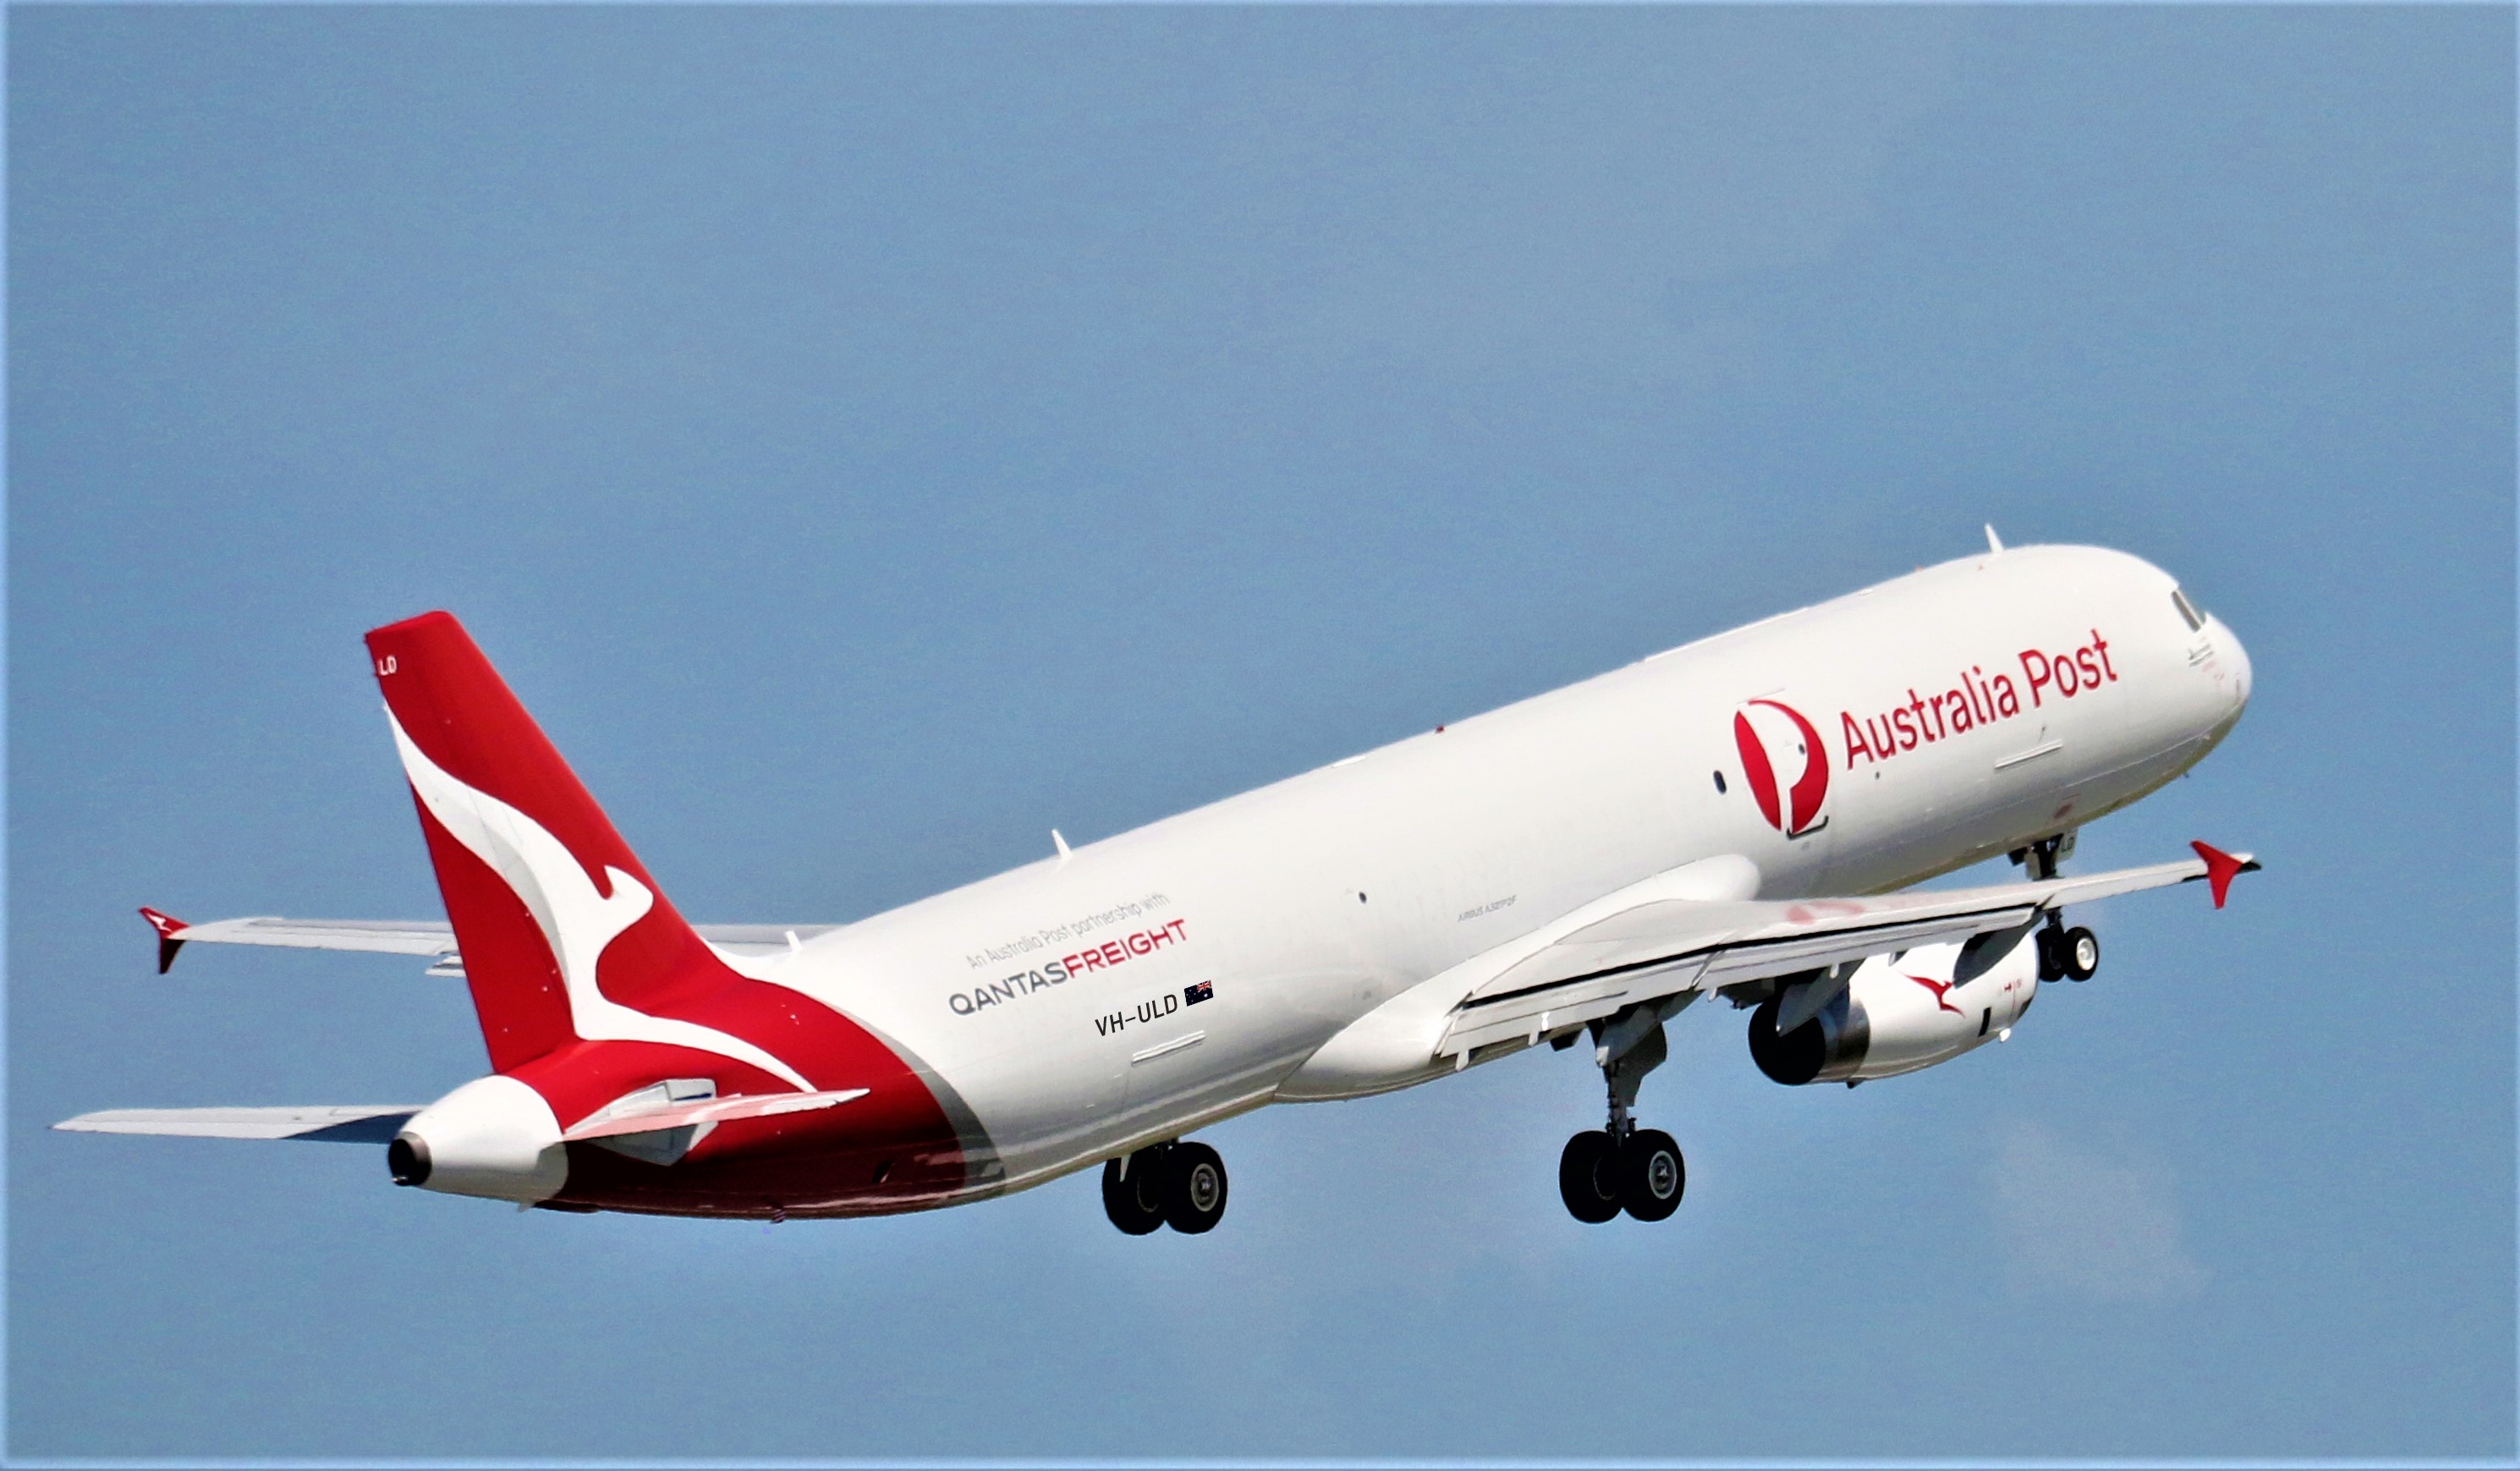 Vallair delivers the world’s first Airbus A321 freighter converted aircraft to launch operator Qantas Freight